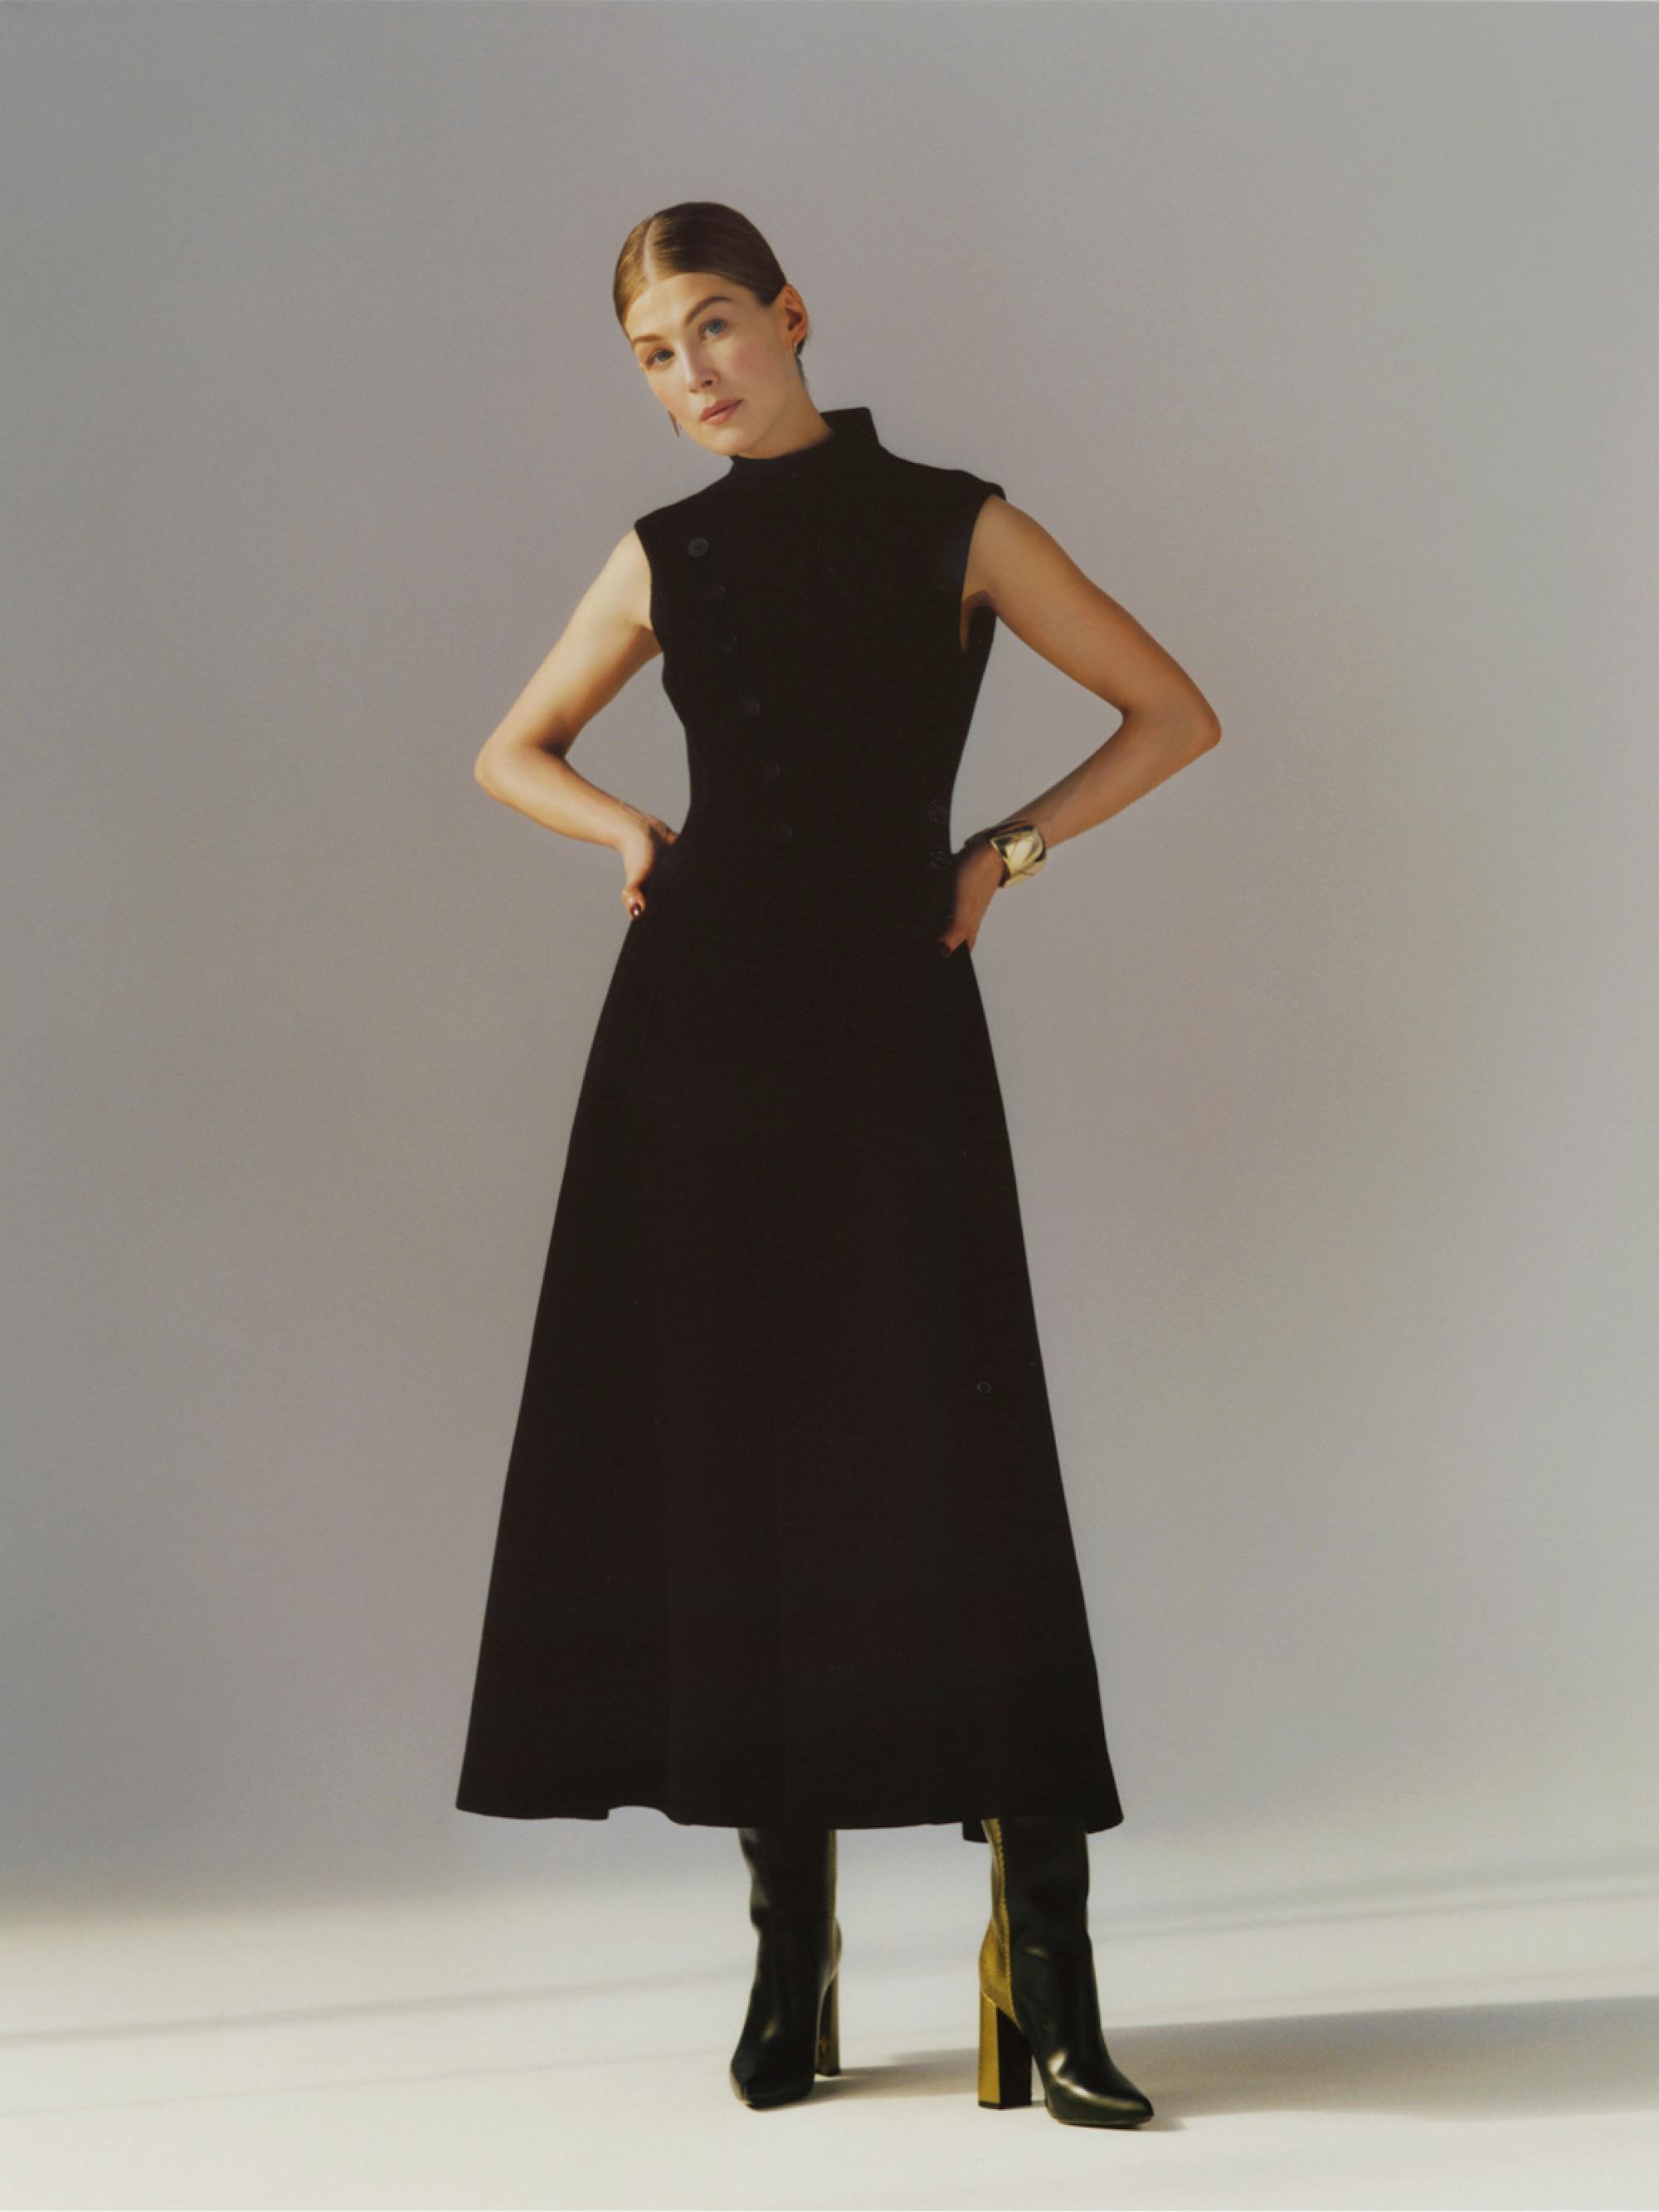 Rosamund Pike poses against a gray and white backdrop in a high-neck, long black dress and heeled black boots, her hands on her hips.